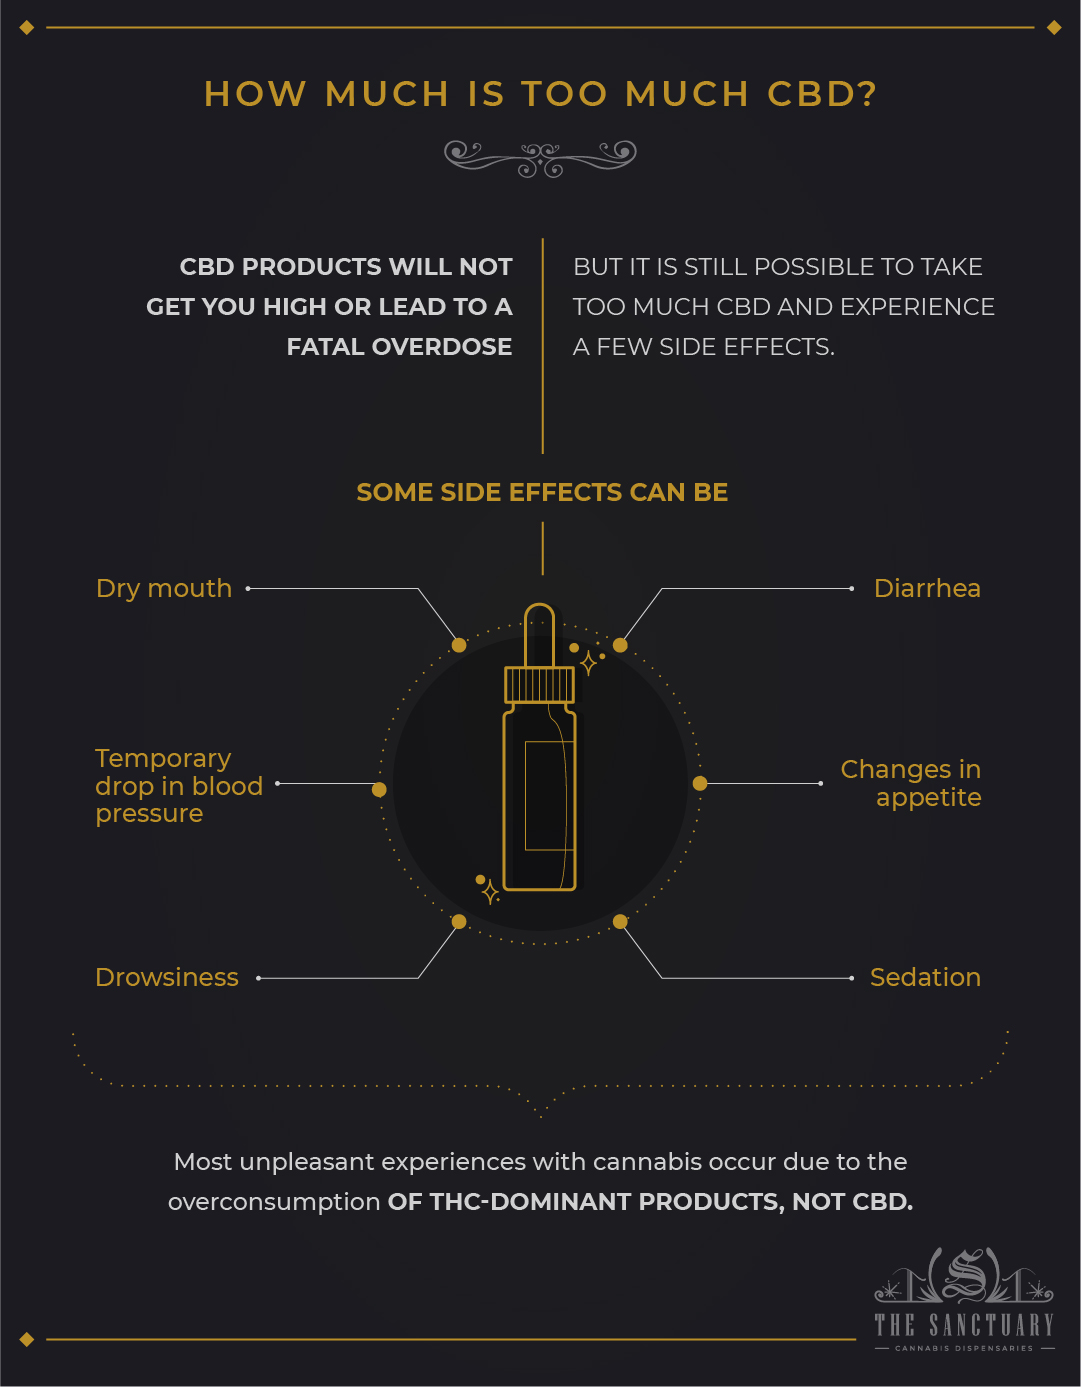 How much is too much CBD?